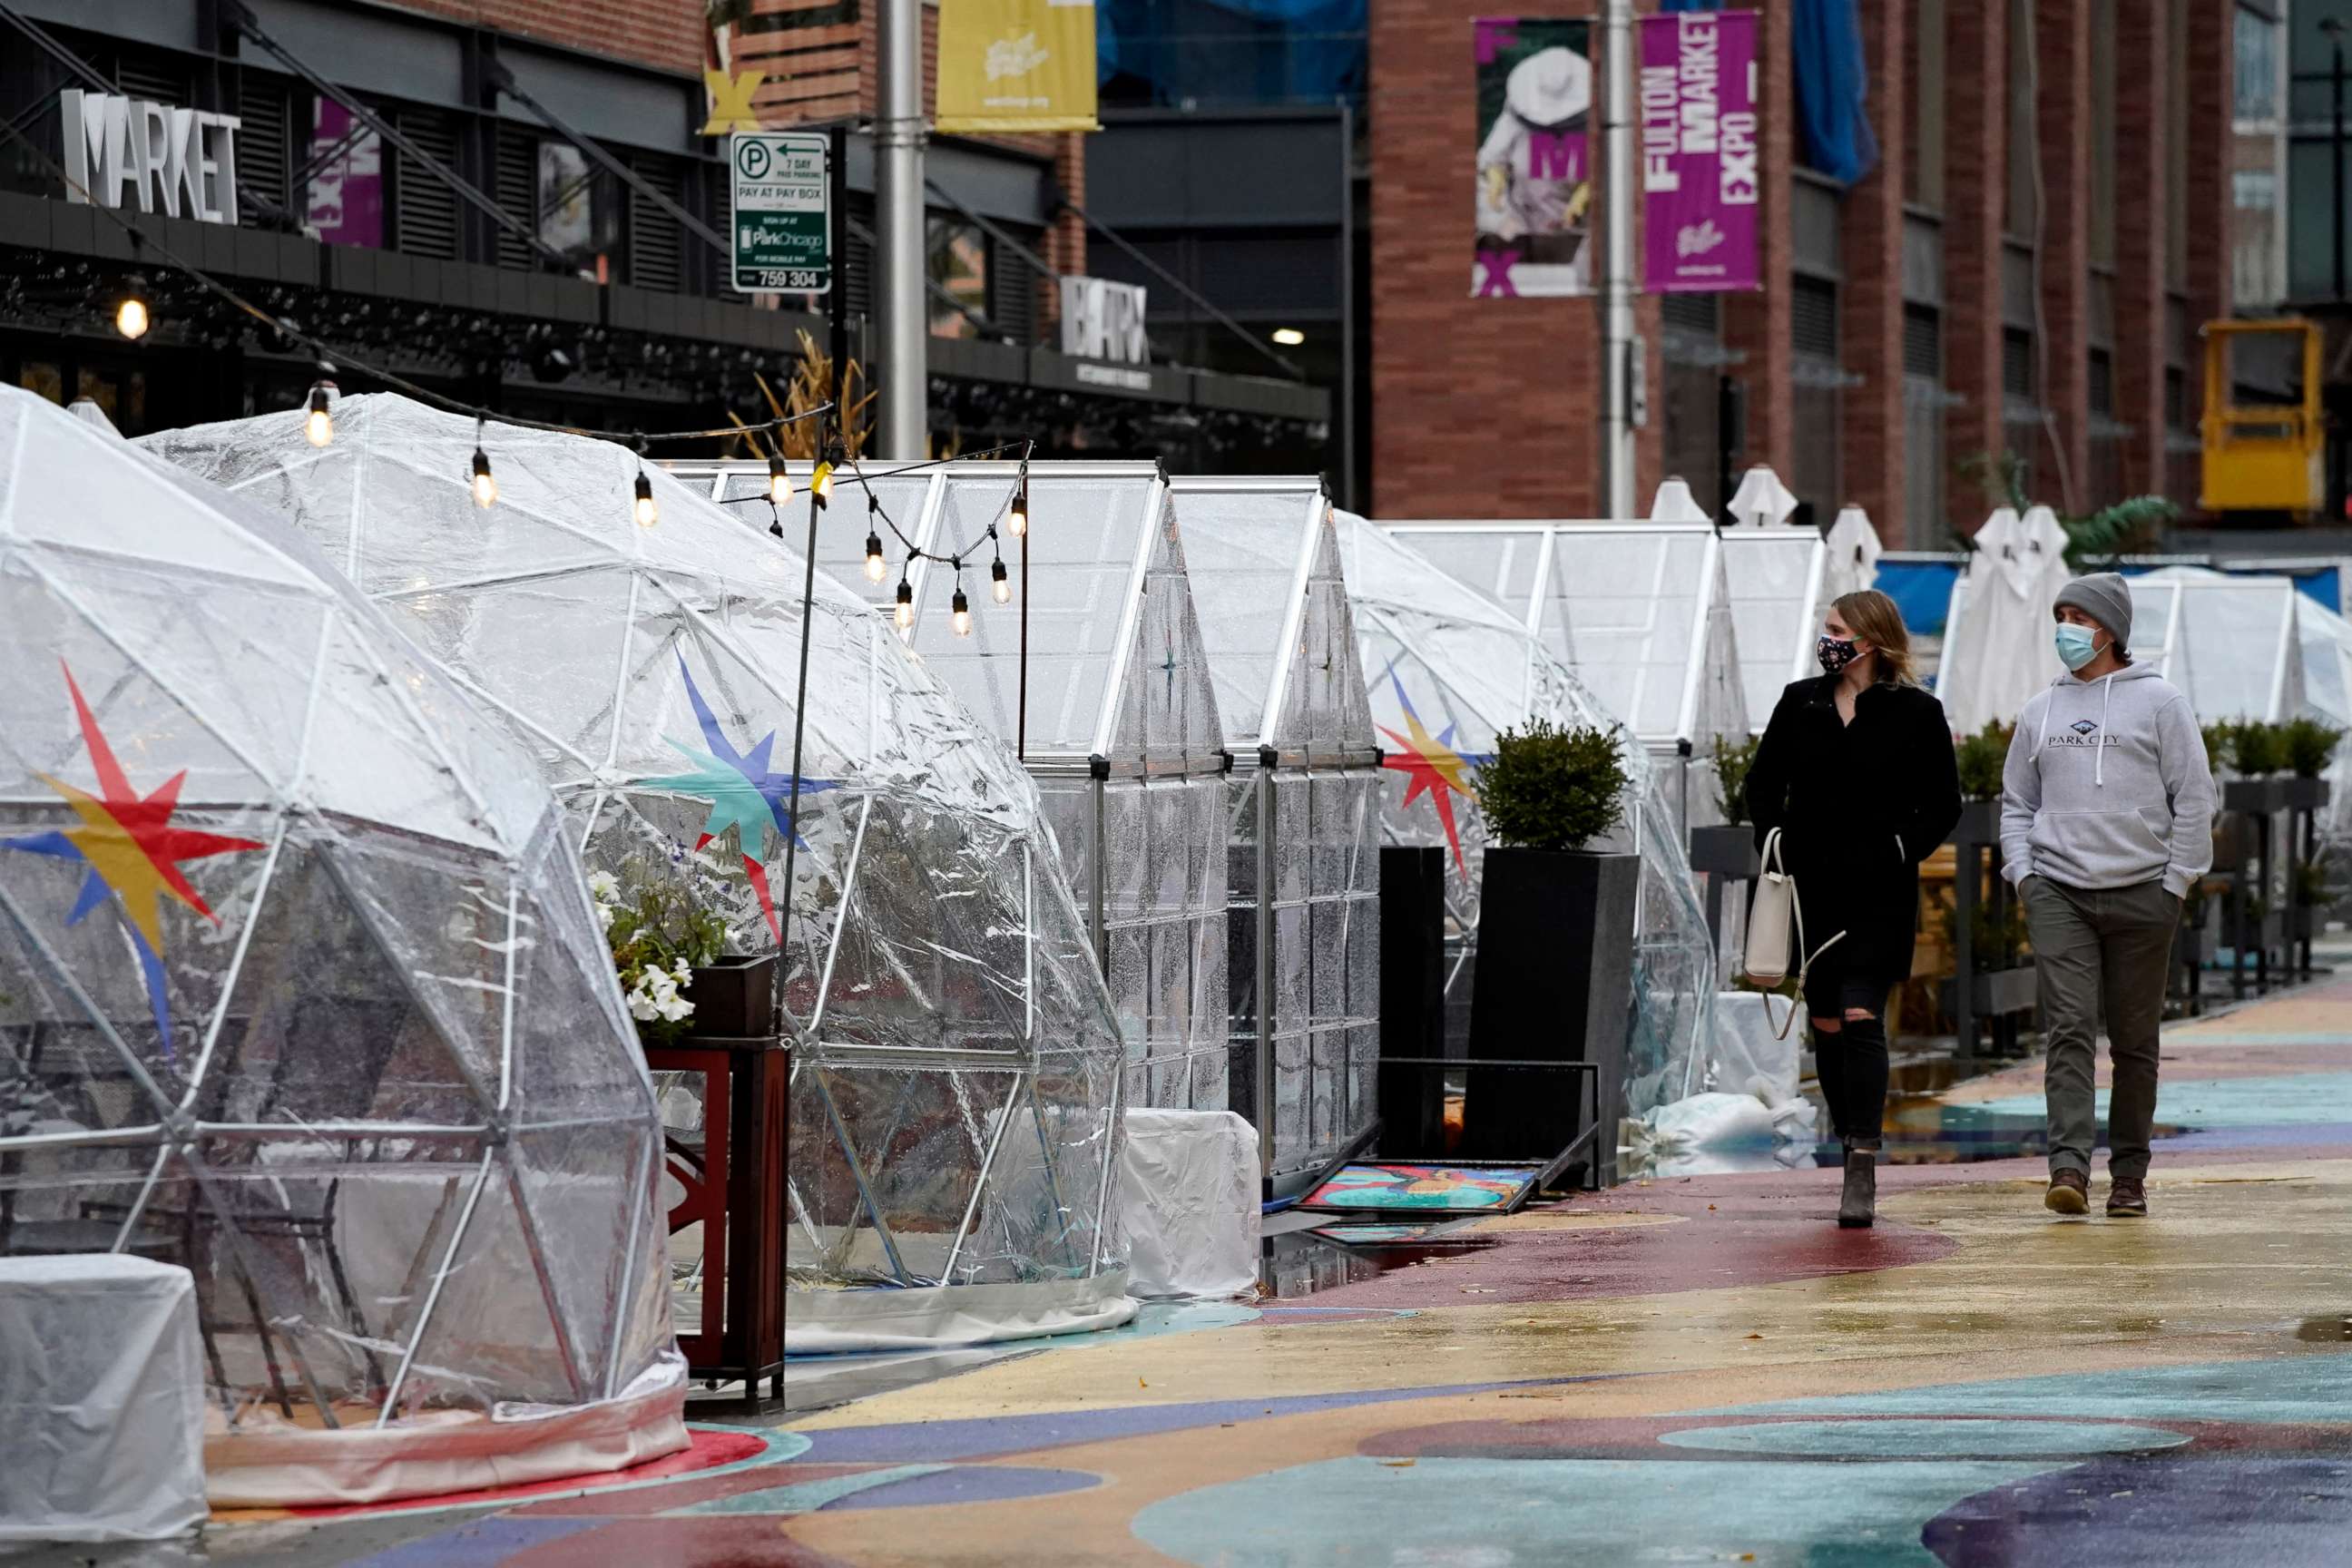 PHOTO: FILE - In this Oct. 18, 2020 file photo, people walk by outdoor plastic dining bubbles on Fulton Market in Chicago. Illinois set another single-day record for coronavirus infections Tuesday, Nov. 10, 2020.